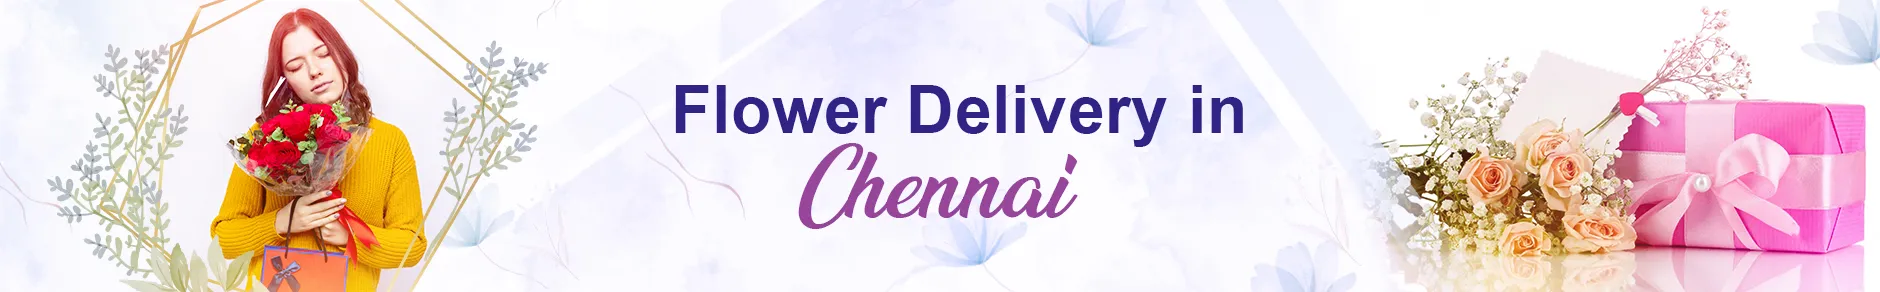 Flower Delivery in Chennai | Send Flowers to Chennai in 2 hours | Free Delivery